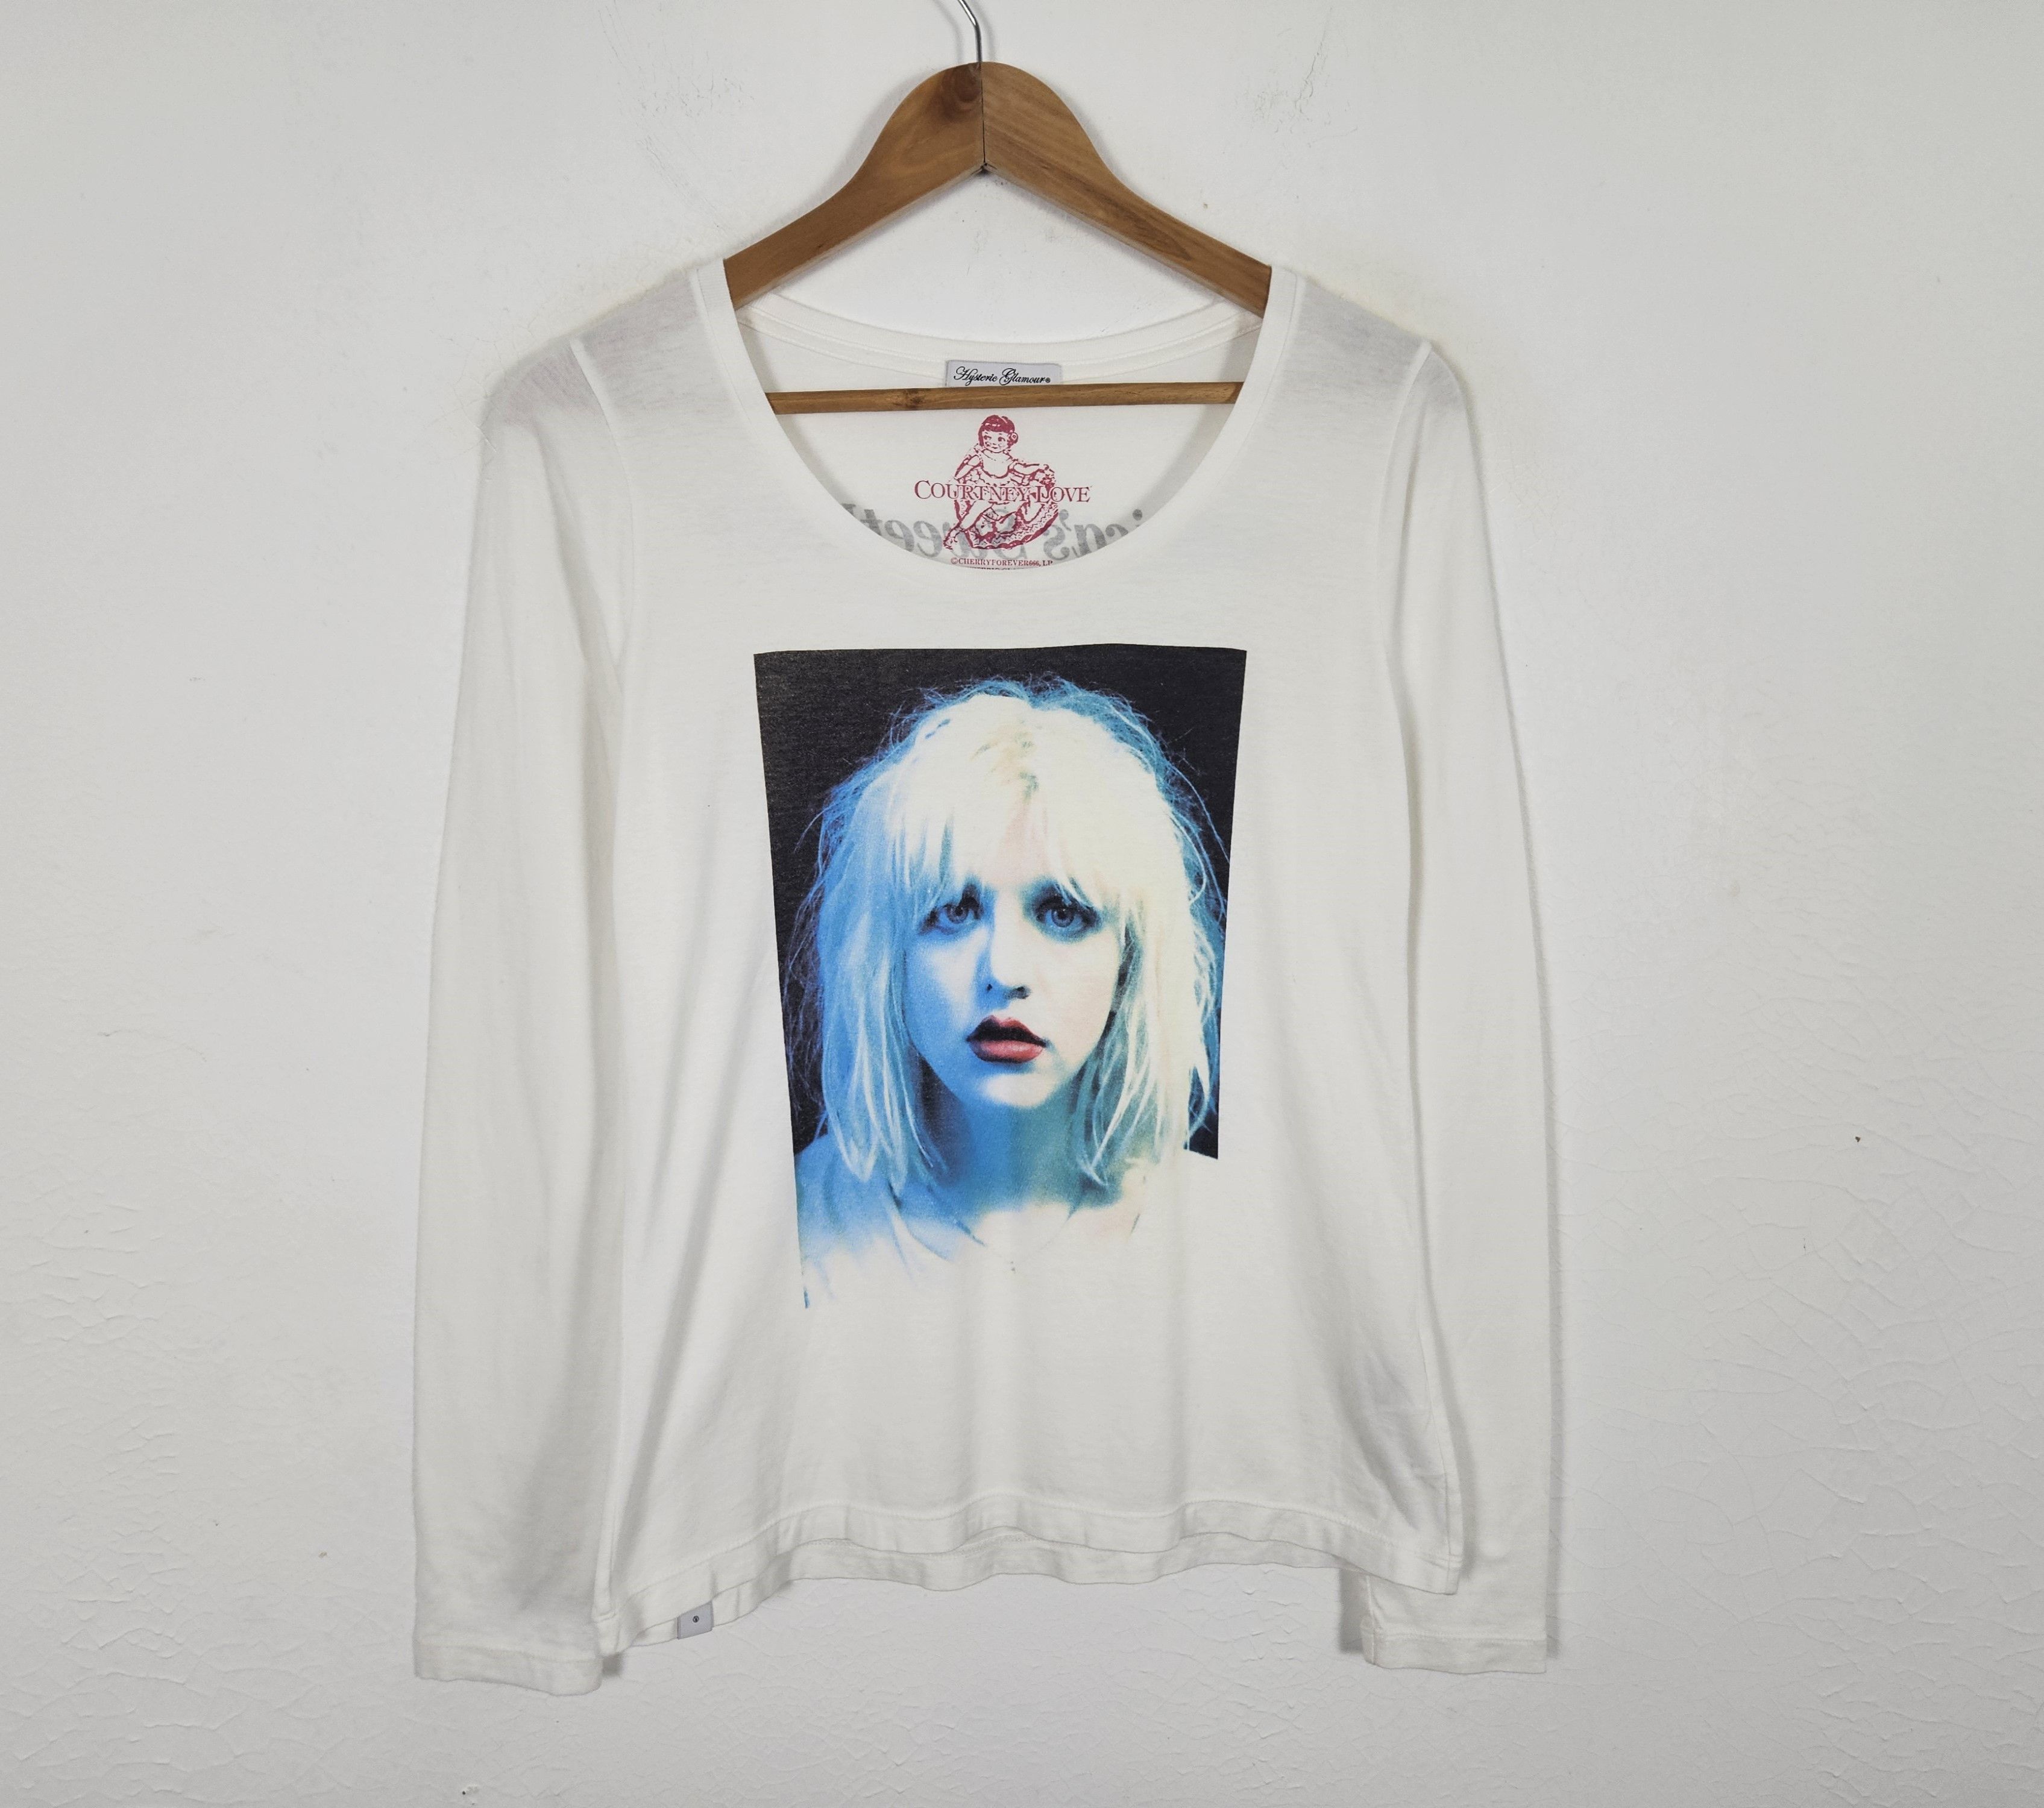 Hysteric Glamour Courtney Love Hole American Sweetheart tee - 3